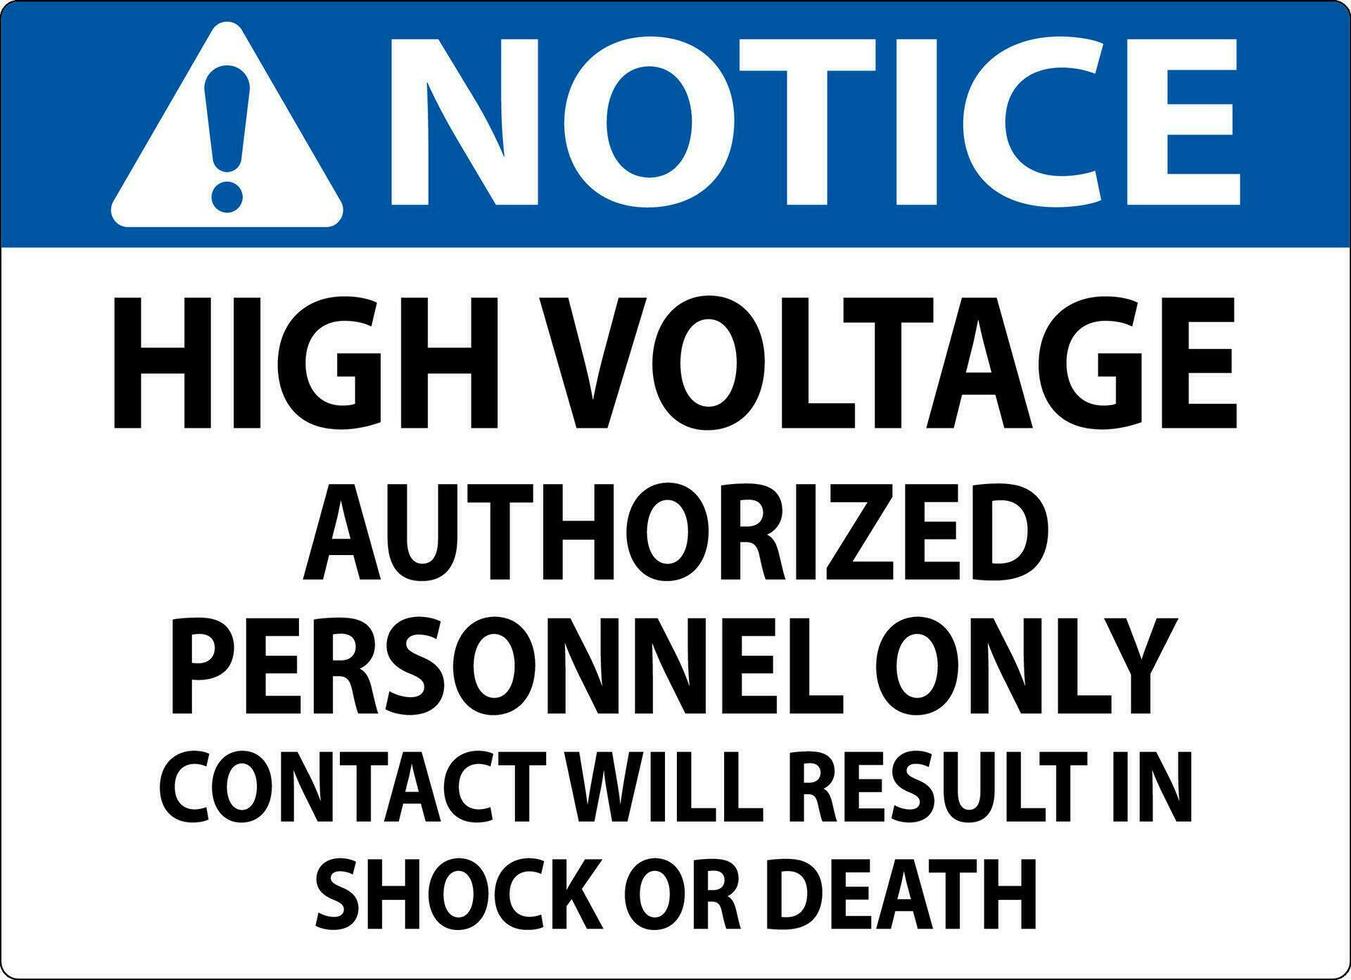 Notice Sign High Voltage, Authorized Personnel Only, Contact Will Result In Shock Or Death vector